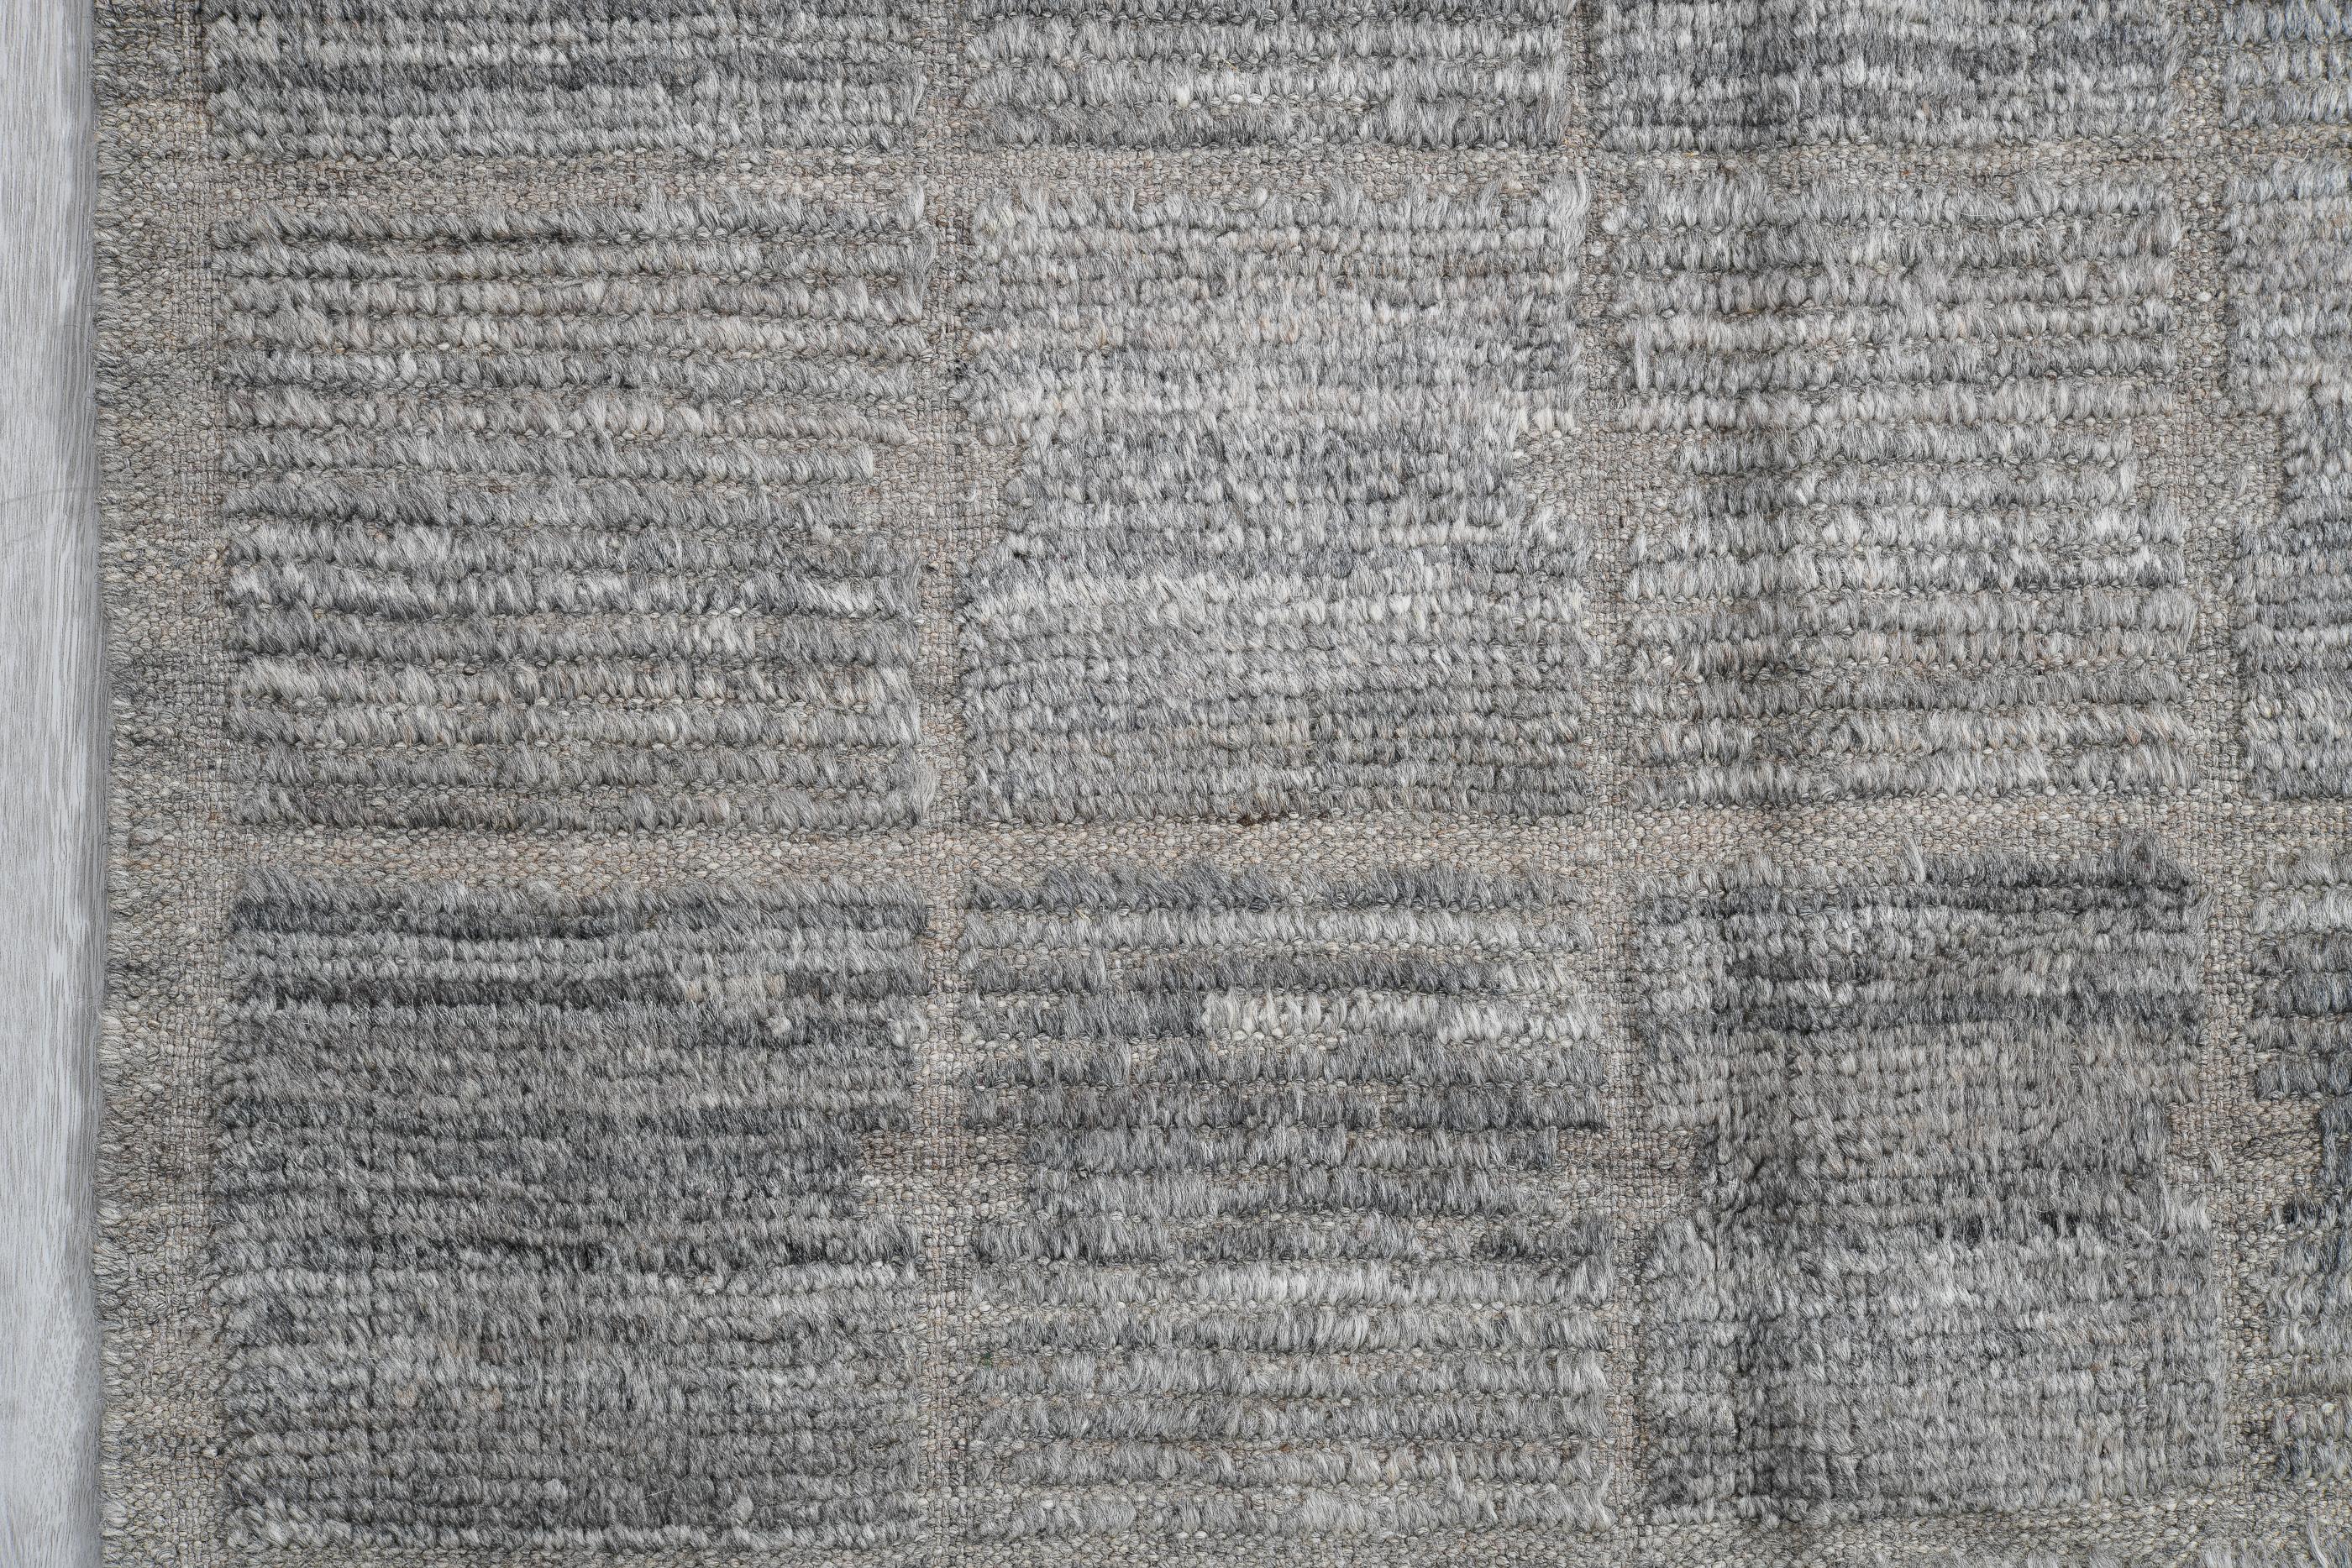 Blackened Blue Grey Tulu Longer Rug In Excellent Condition For Sale In New York, NY